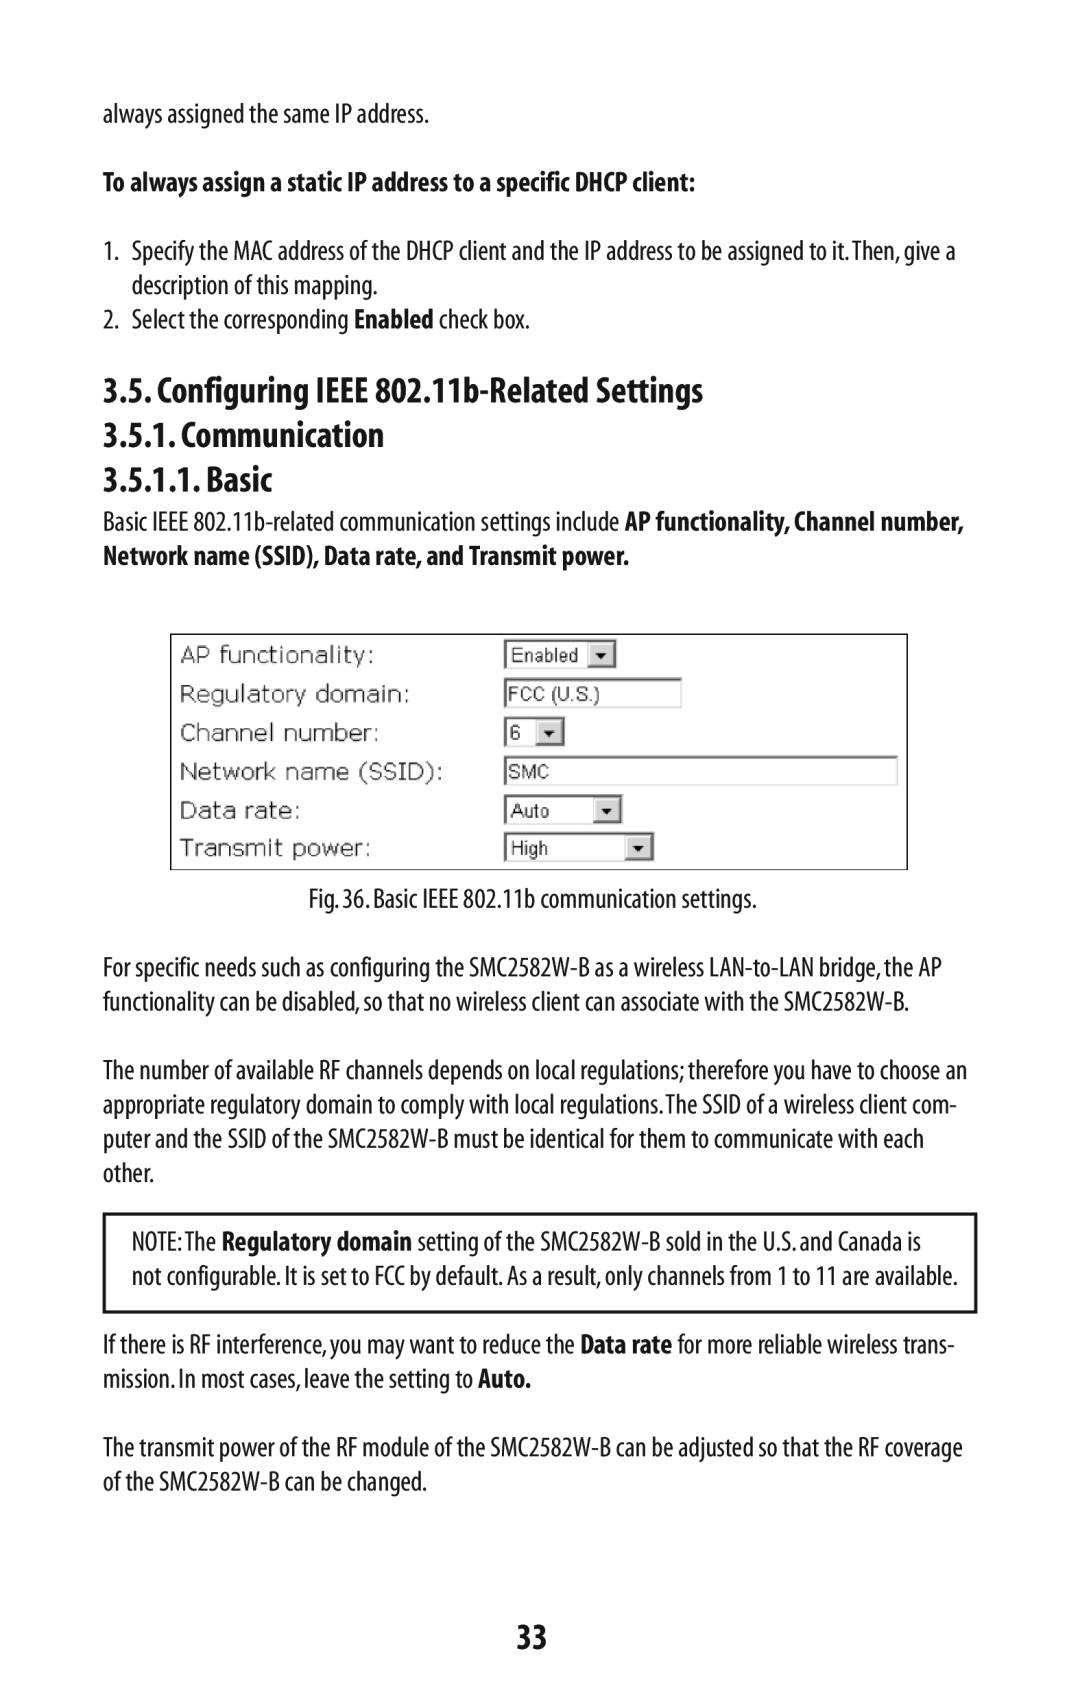 SMC Networks SMC2582W-B manual Configuring IEEE 802.11b-Related Settings 3.5.1. Communication, Basic 